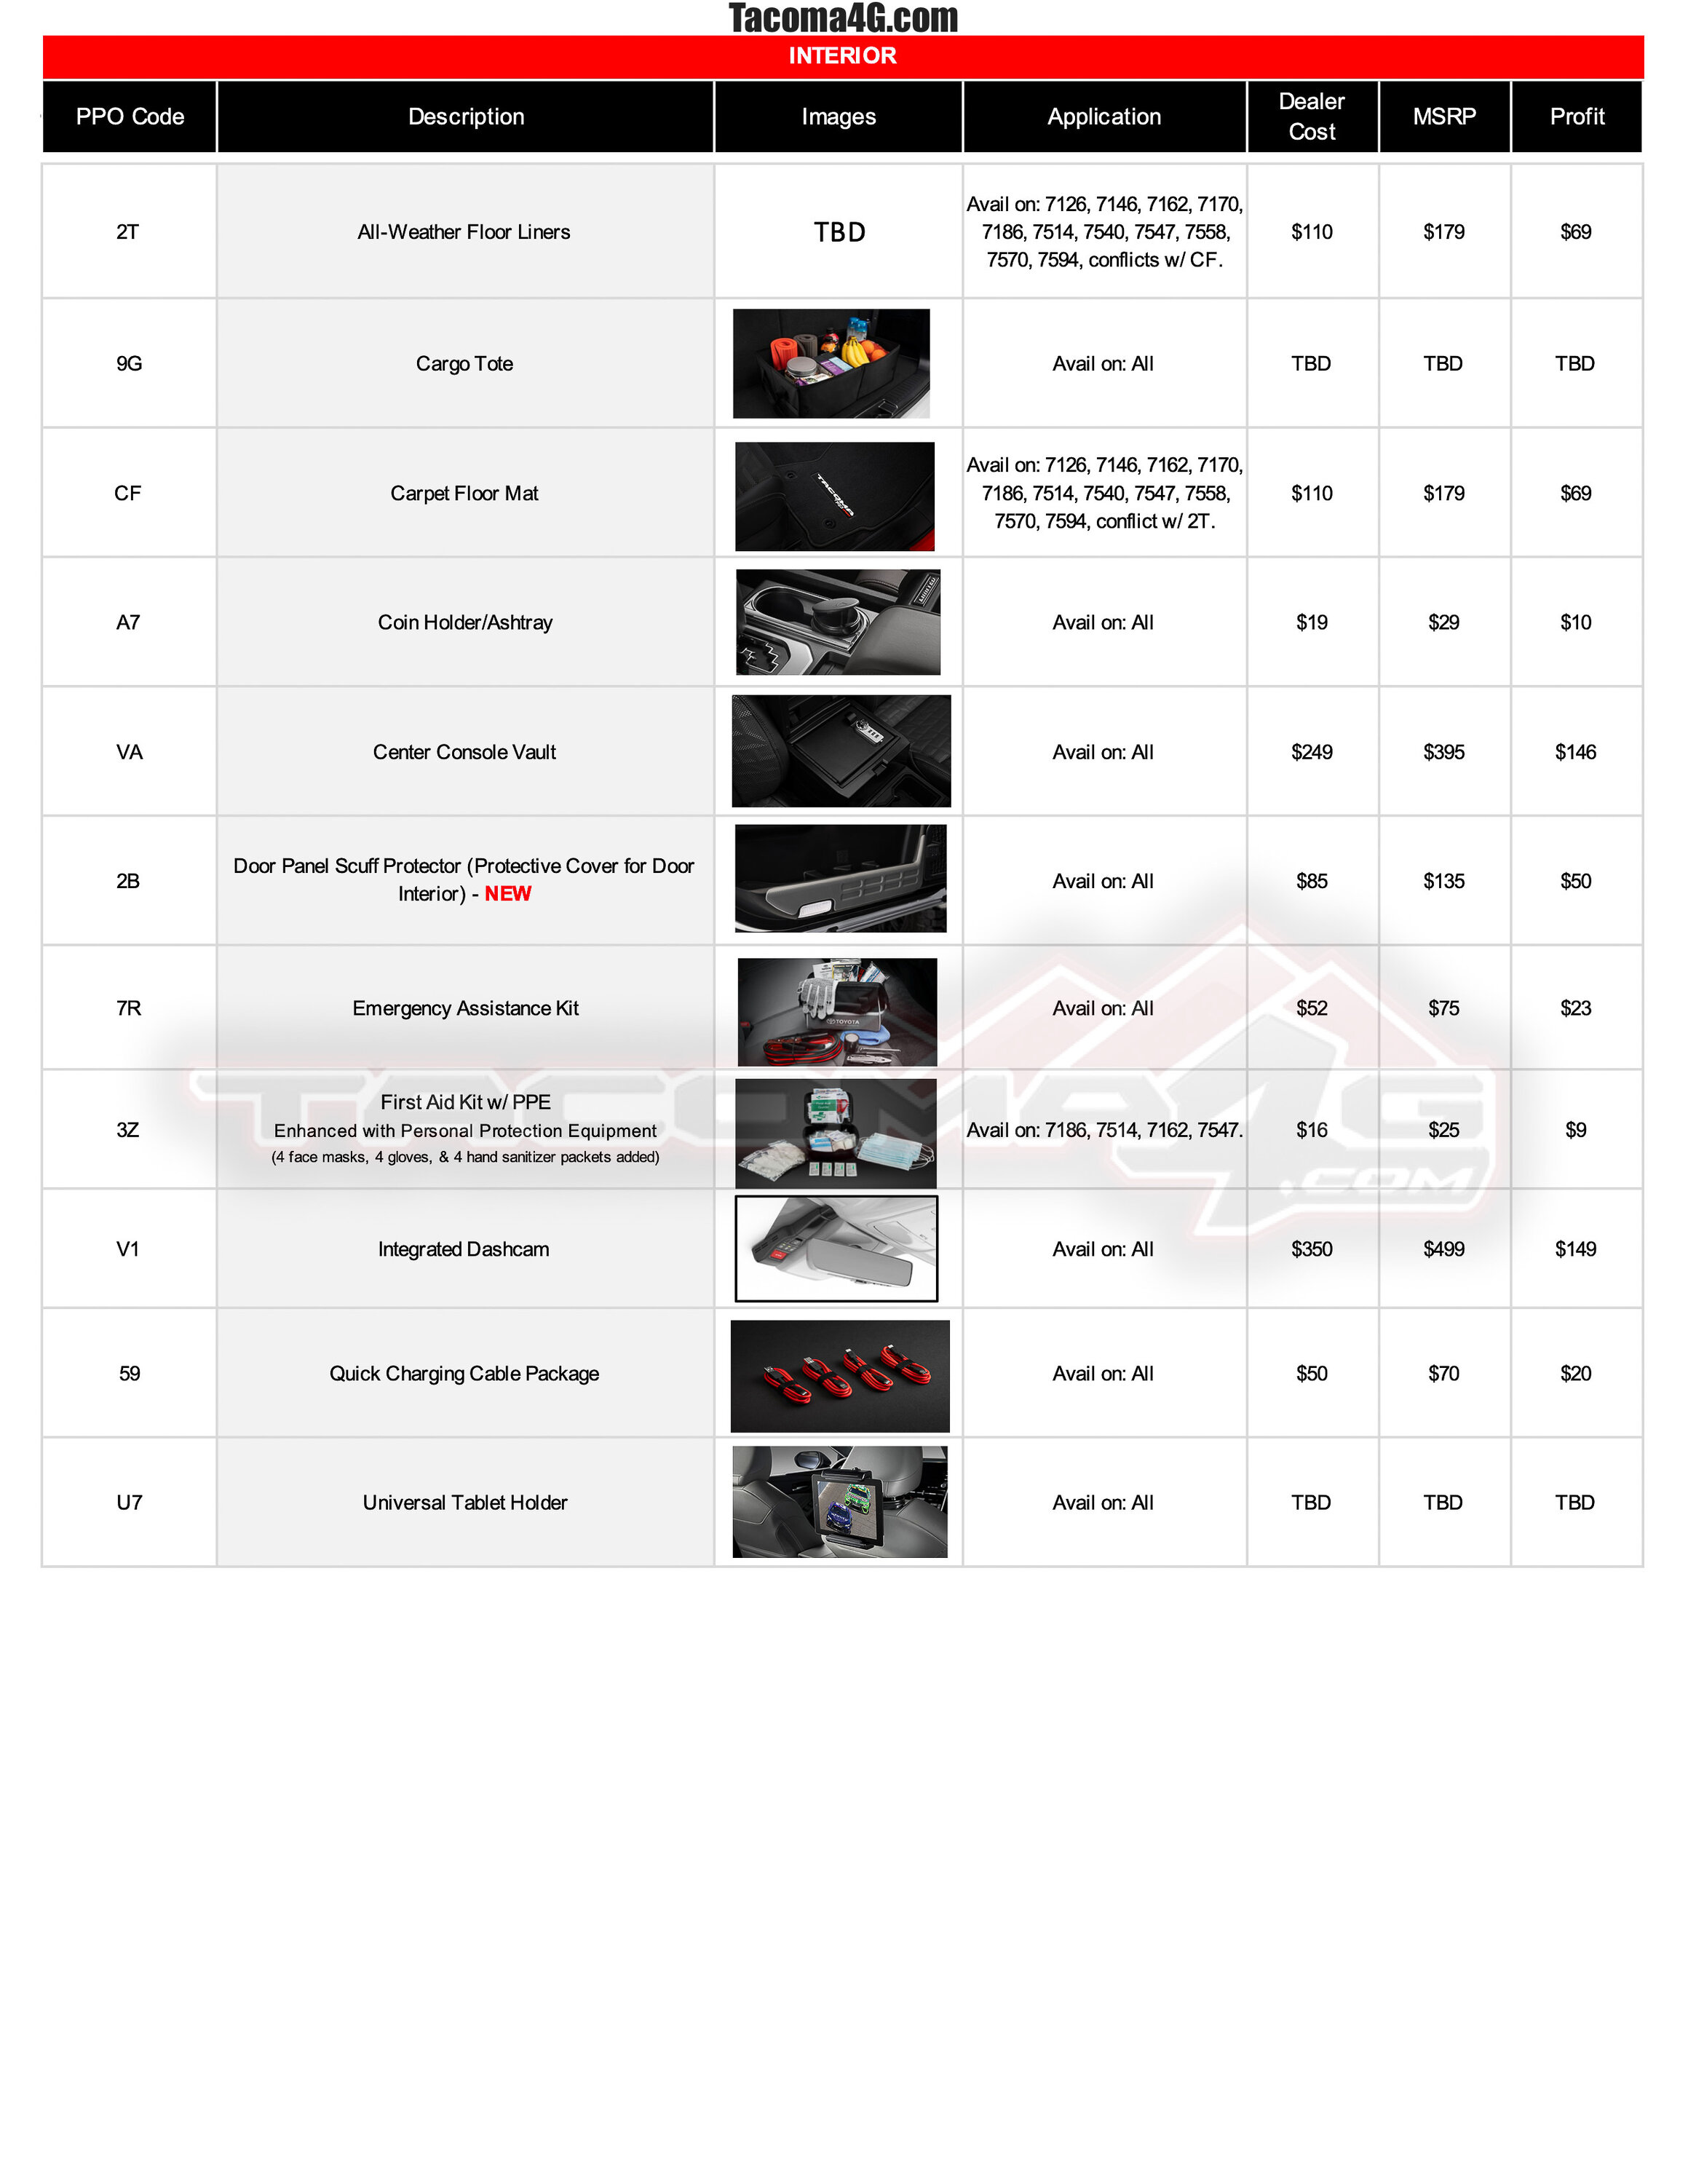 2024 Tacoma 2024 Tacoma Post-Production Options (PPO) Guide - OEM / TRD Accessories Parts + Pricing!  [UPDATED 4-24-24] 2024 Tacoma PPO Accessories Guide_02.09.24-5